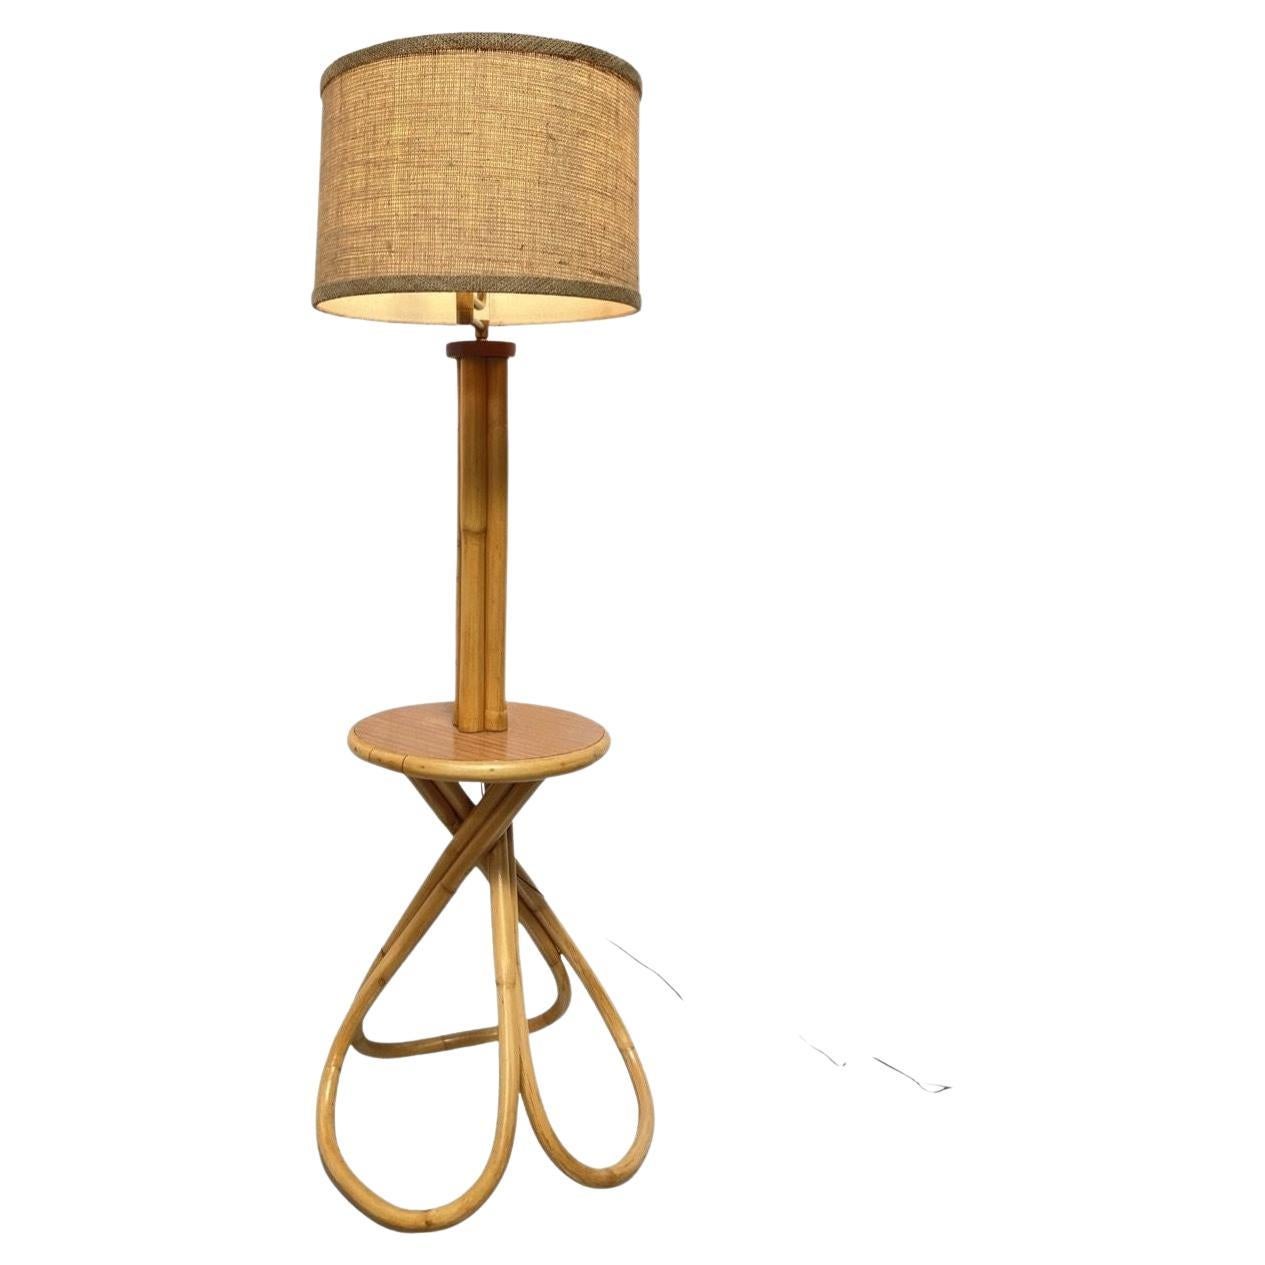 Restored Mid Century Bent Rattan Floor Lamp with Side Table Base and Hemp Shade